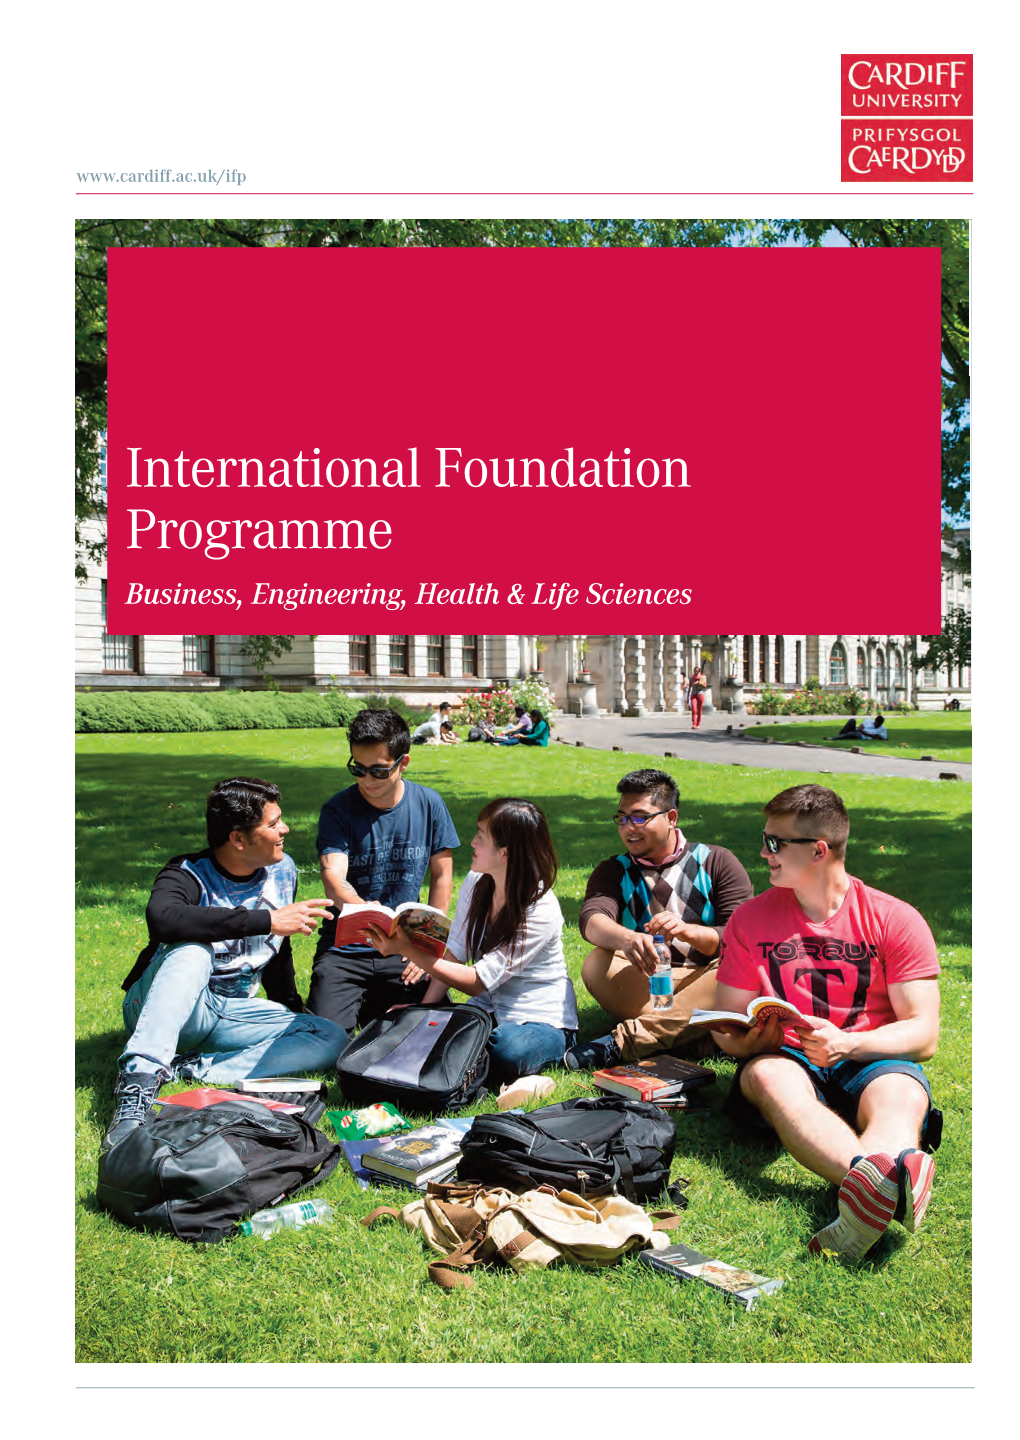 International Foundation Programme Business, Engineering, Health & Life Sciences UNI IFP BRO 2015-16 [P] Layout 1 16/07/2015 12:00 Page 2